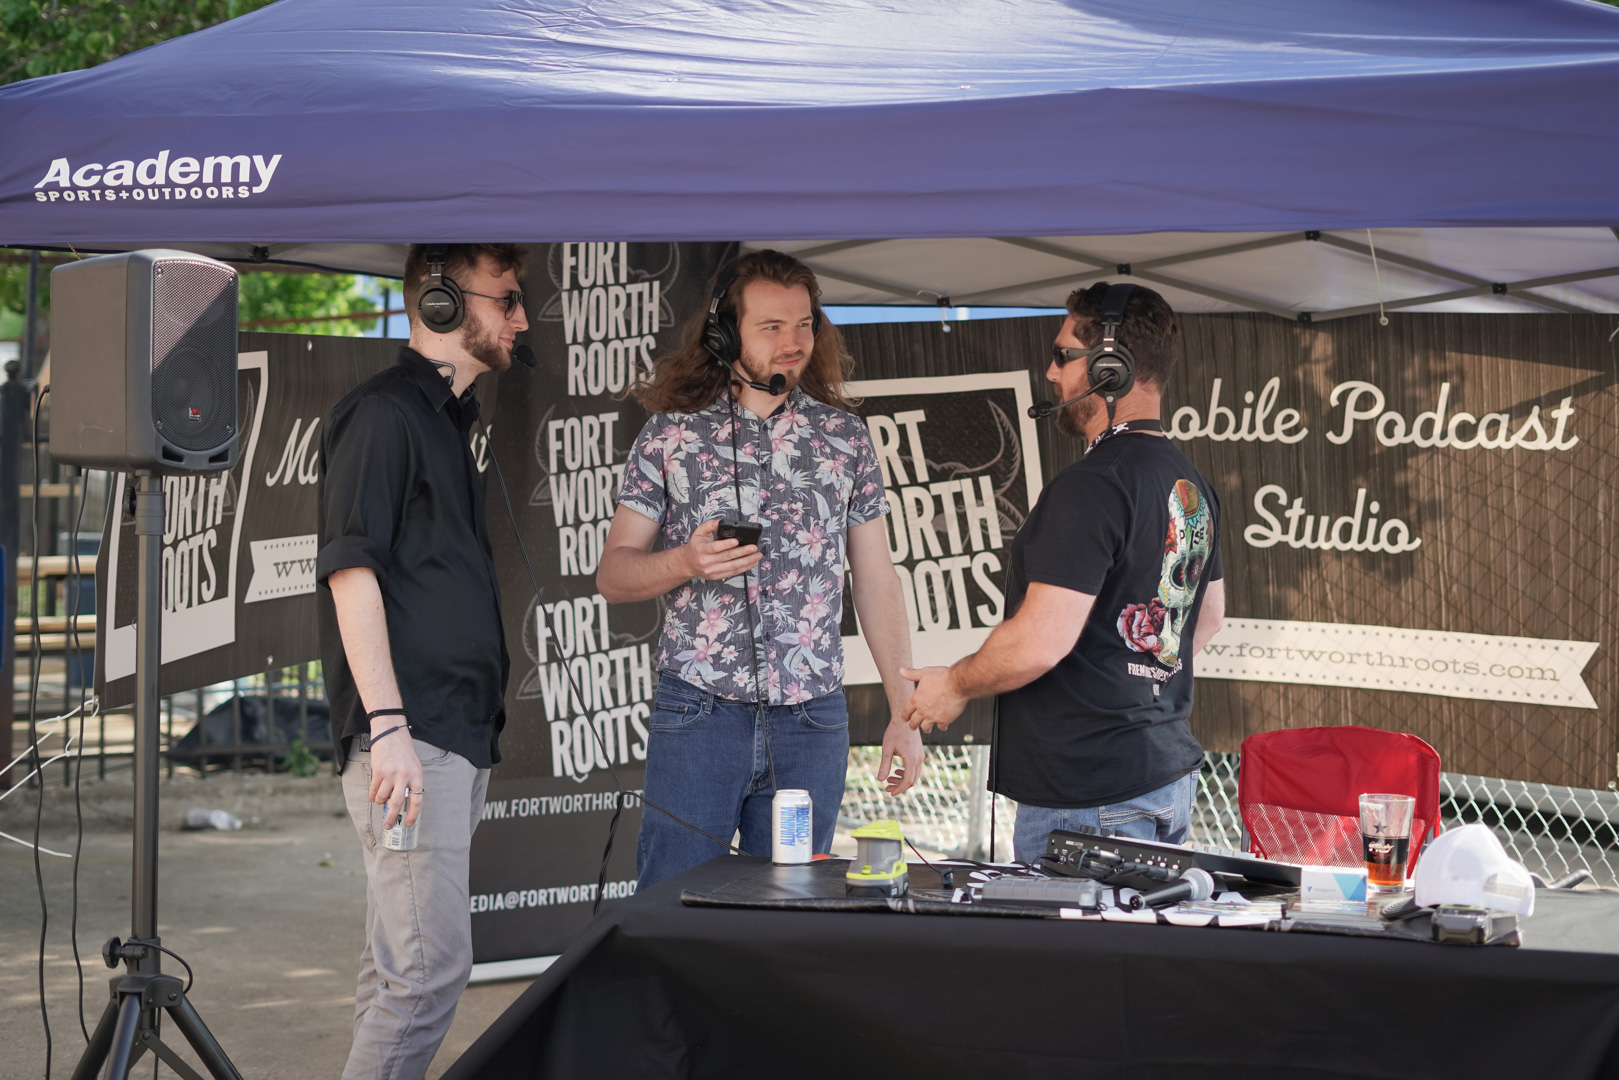 Two men interviewed by another man while standing in an outdoor mobile podcast booth